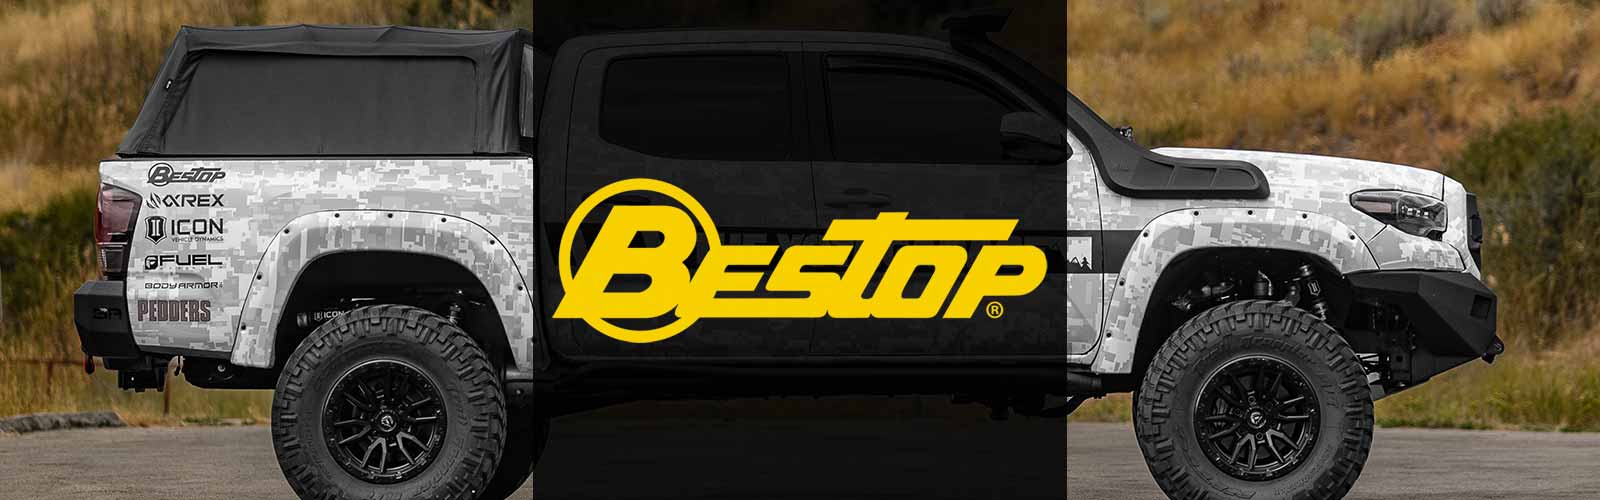 Bestop Toyota Truck shells and bed covers